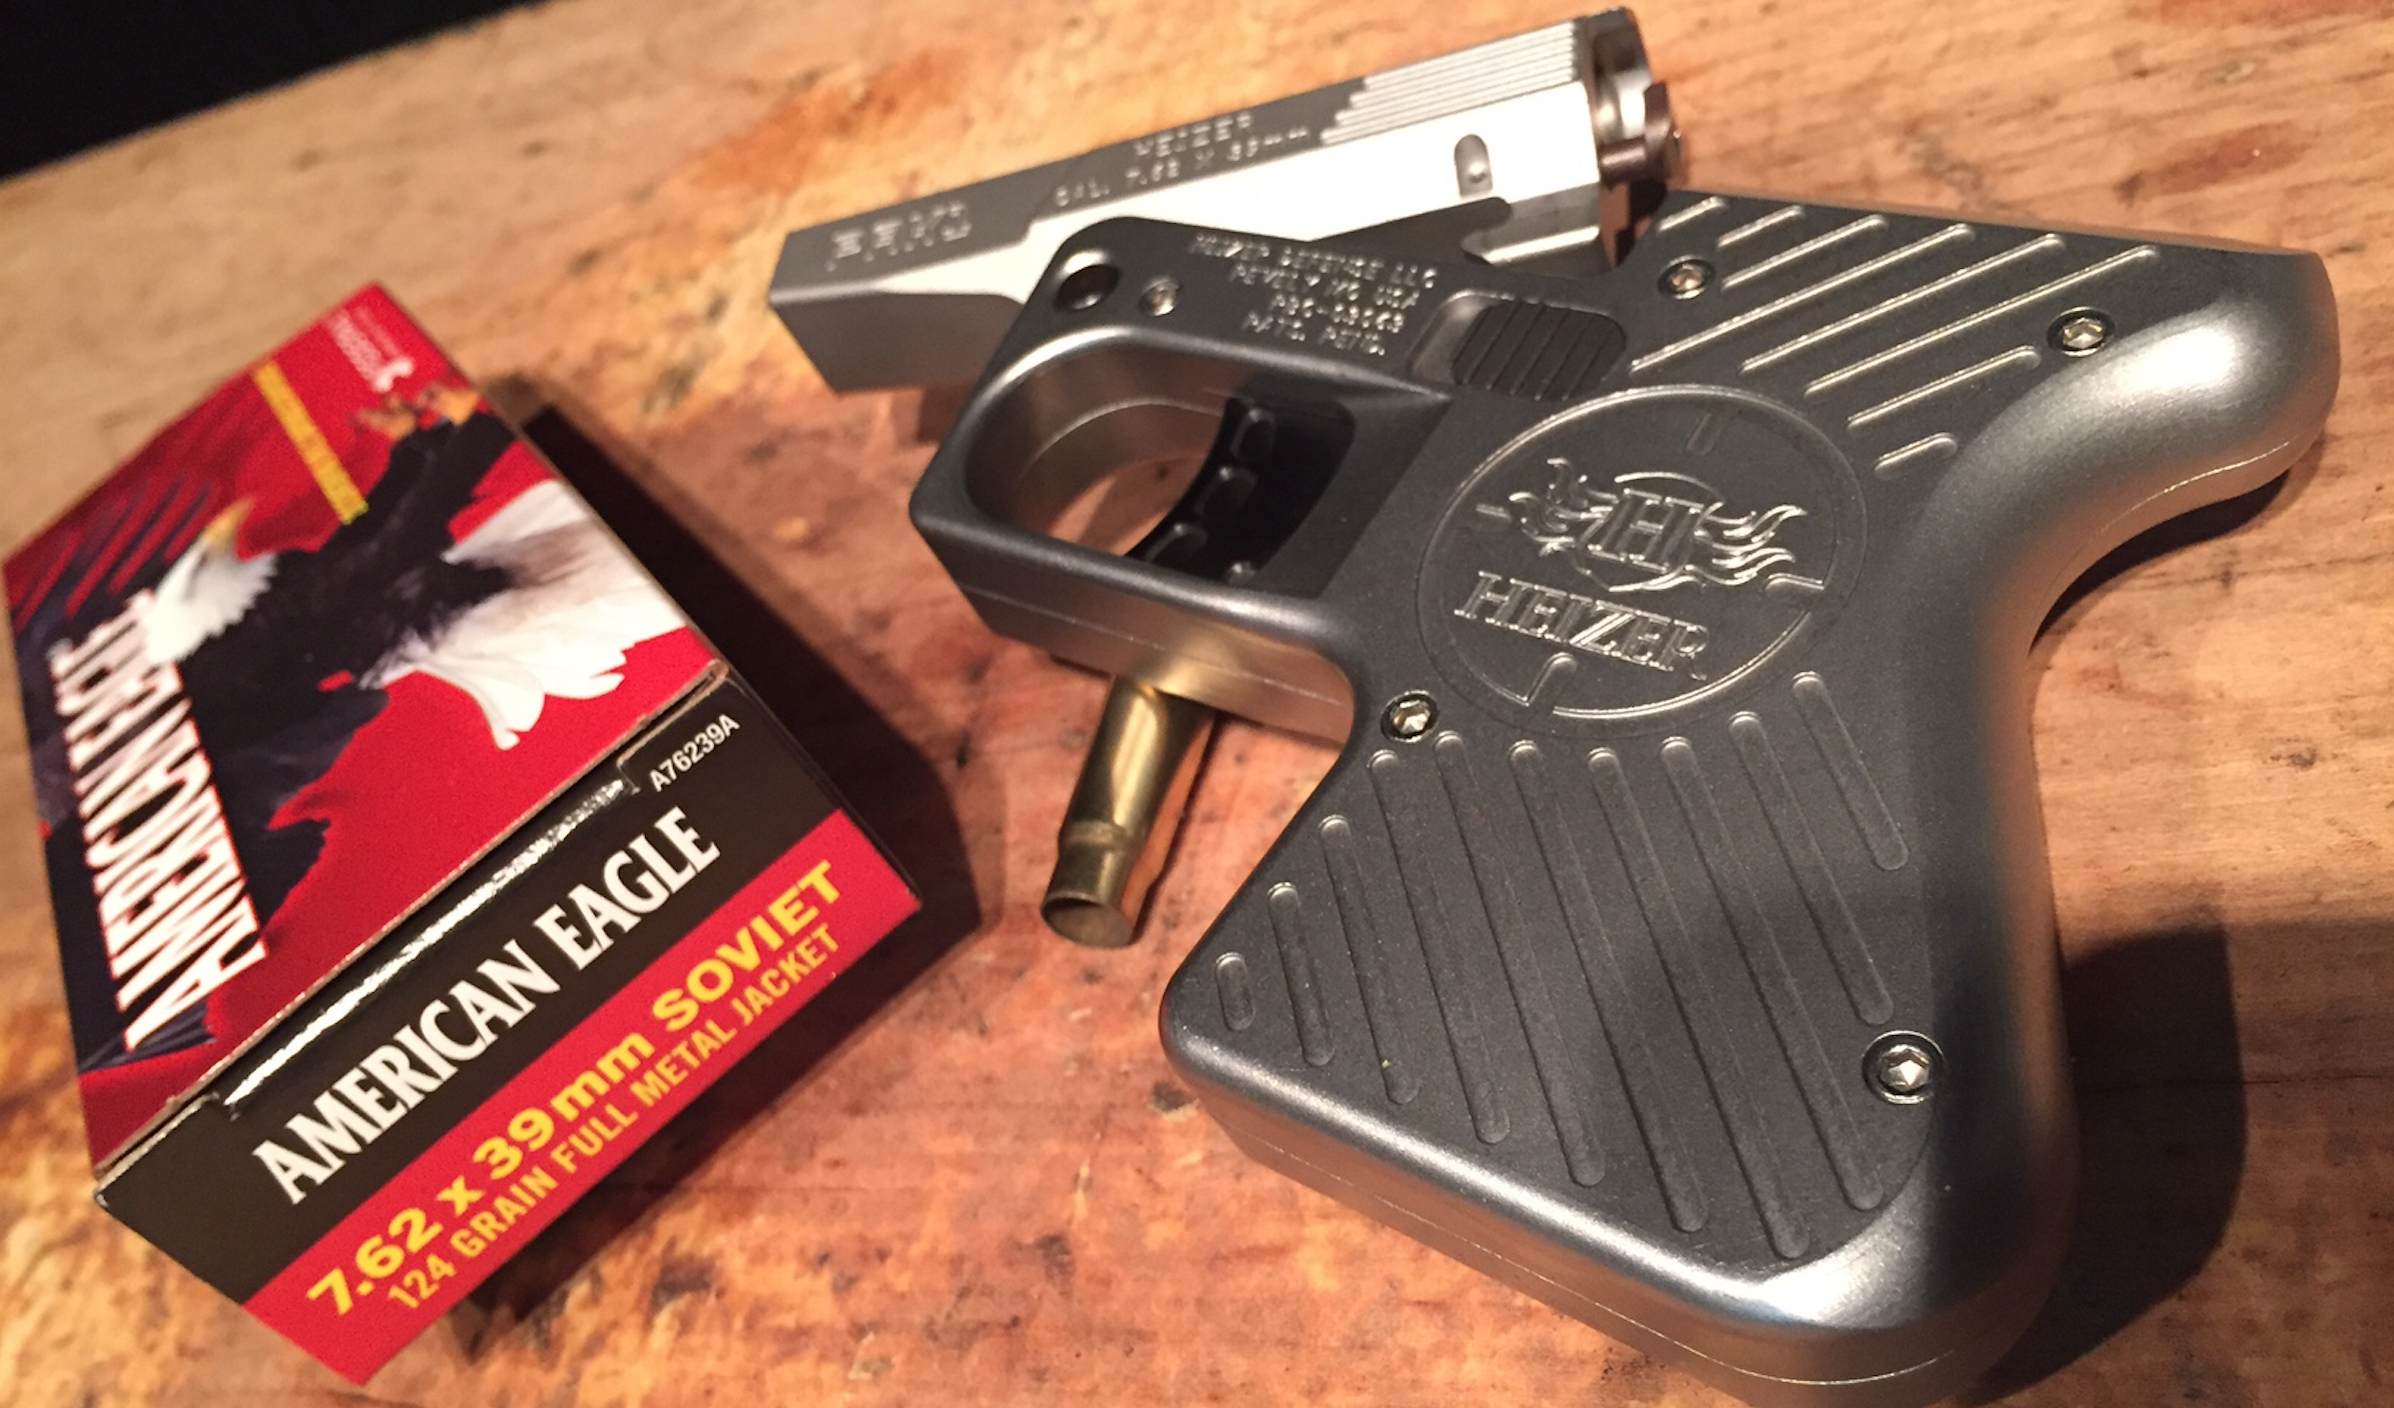 Heizer Defense: Space Age Derringers and More For Self Defense